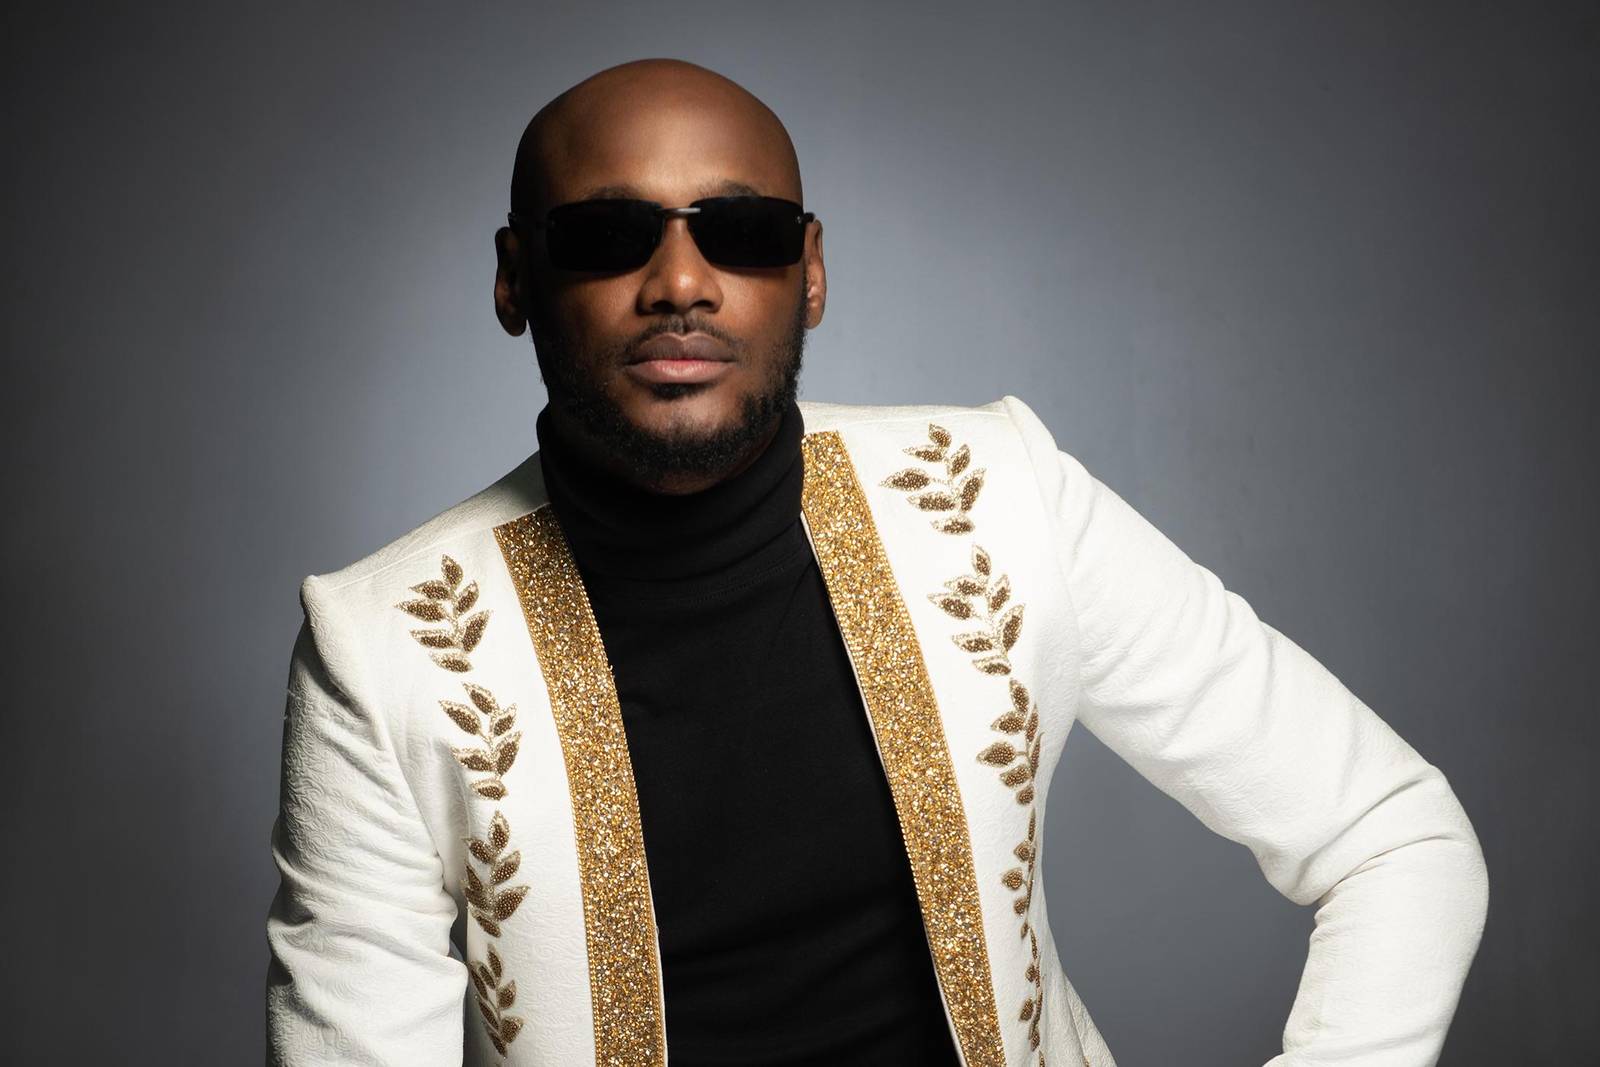 List of All 2Face's Songs